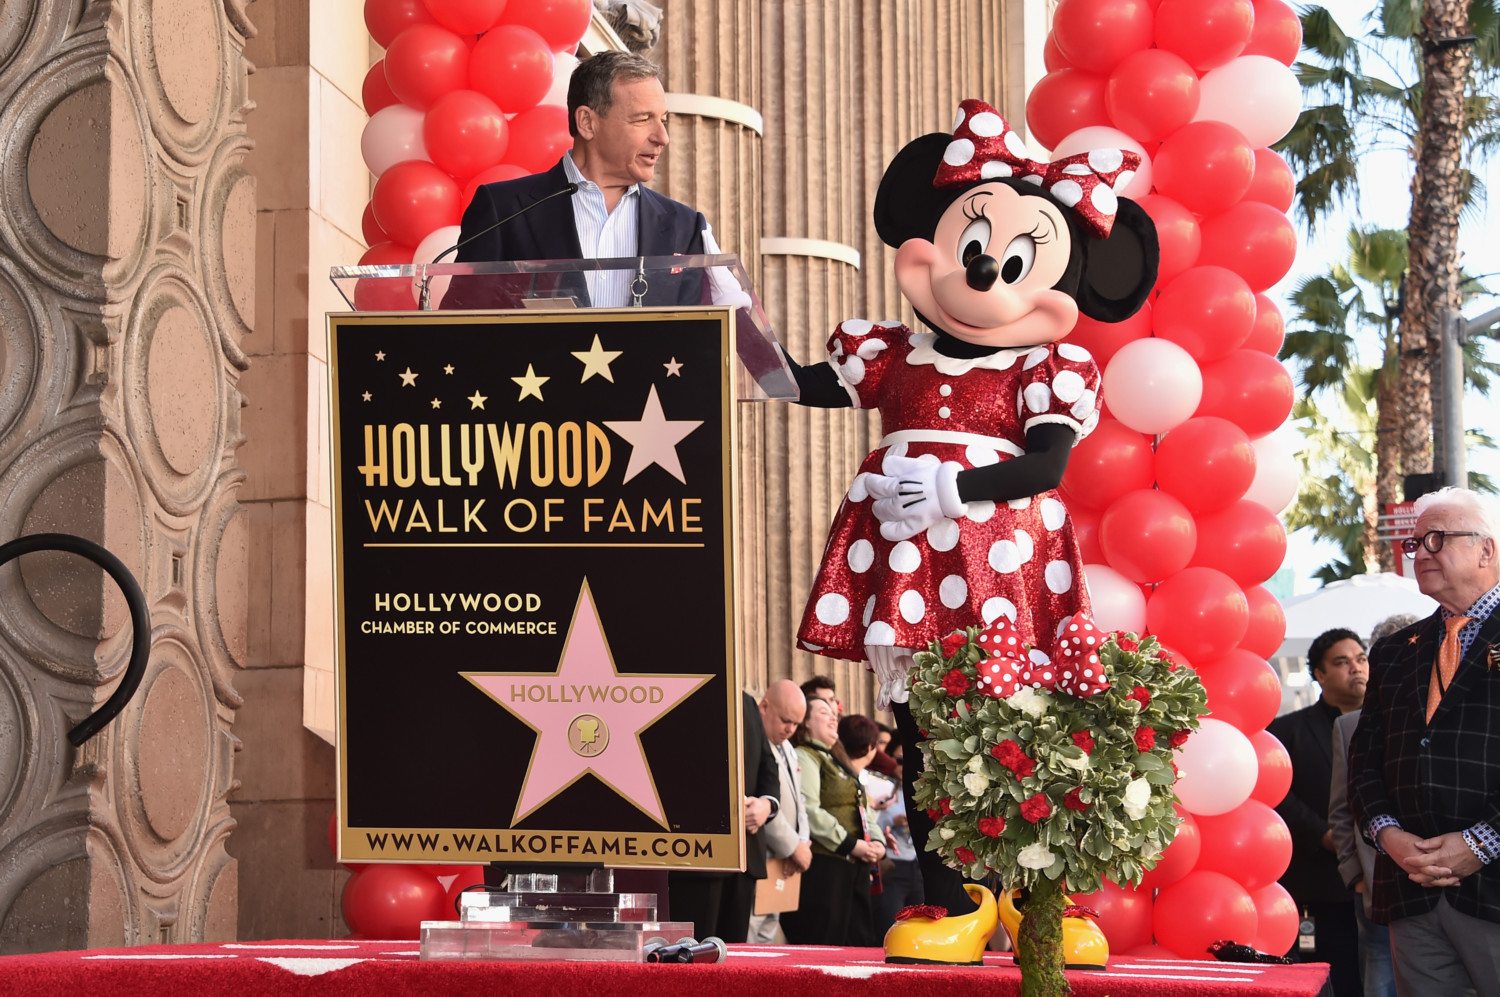 Disney's Minnie Mouse Celebrates Her 90th Anniversary With Star On The Hollywood Walk Of Fame